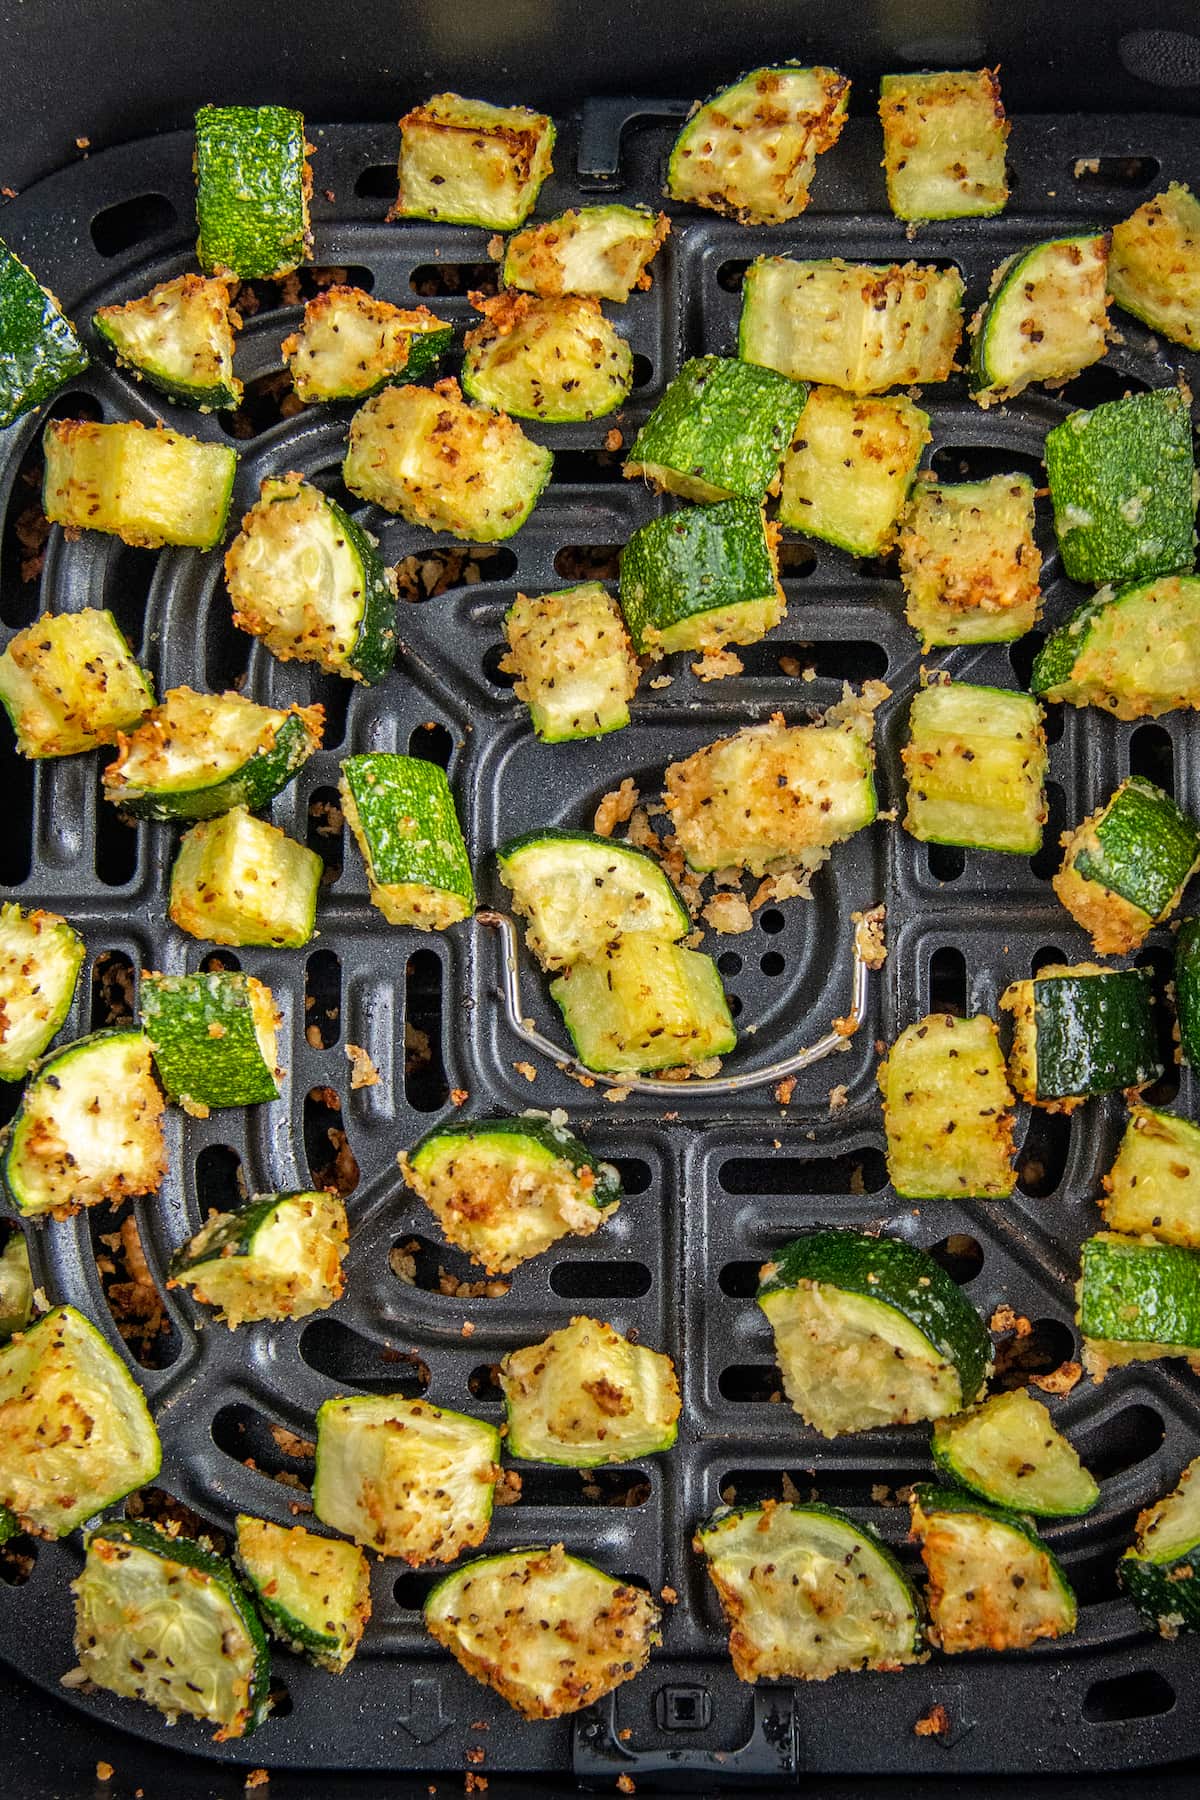 Cooked zucchini in air fryer.